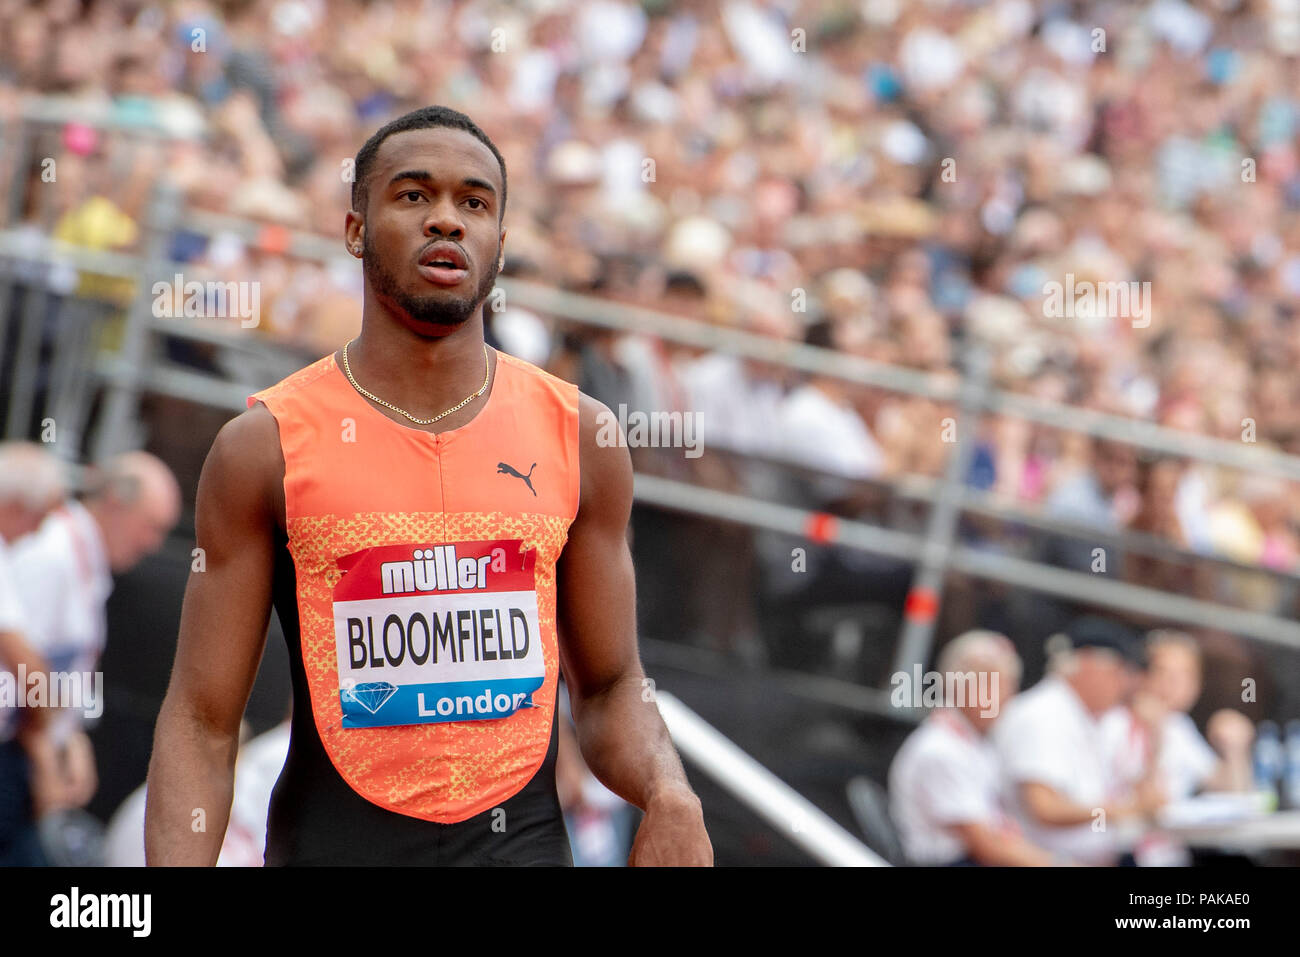 London, UK. 22nd July 2018. Akeem Bloomfield (JAM) looks on after winning the 200m at the Muller Anniversary Games at the London Stadium, London, Great Britiain, on 22 July 2018. Credit: Andrew Peat/Alamy Live News Stock Photo